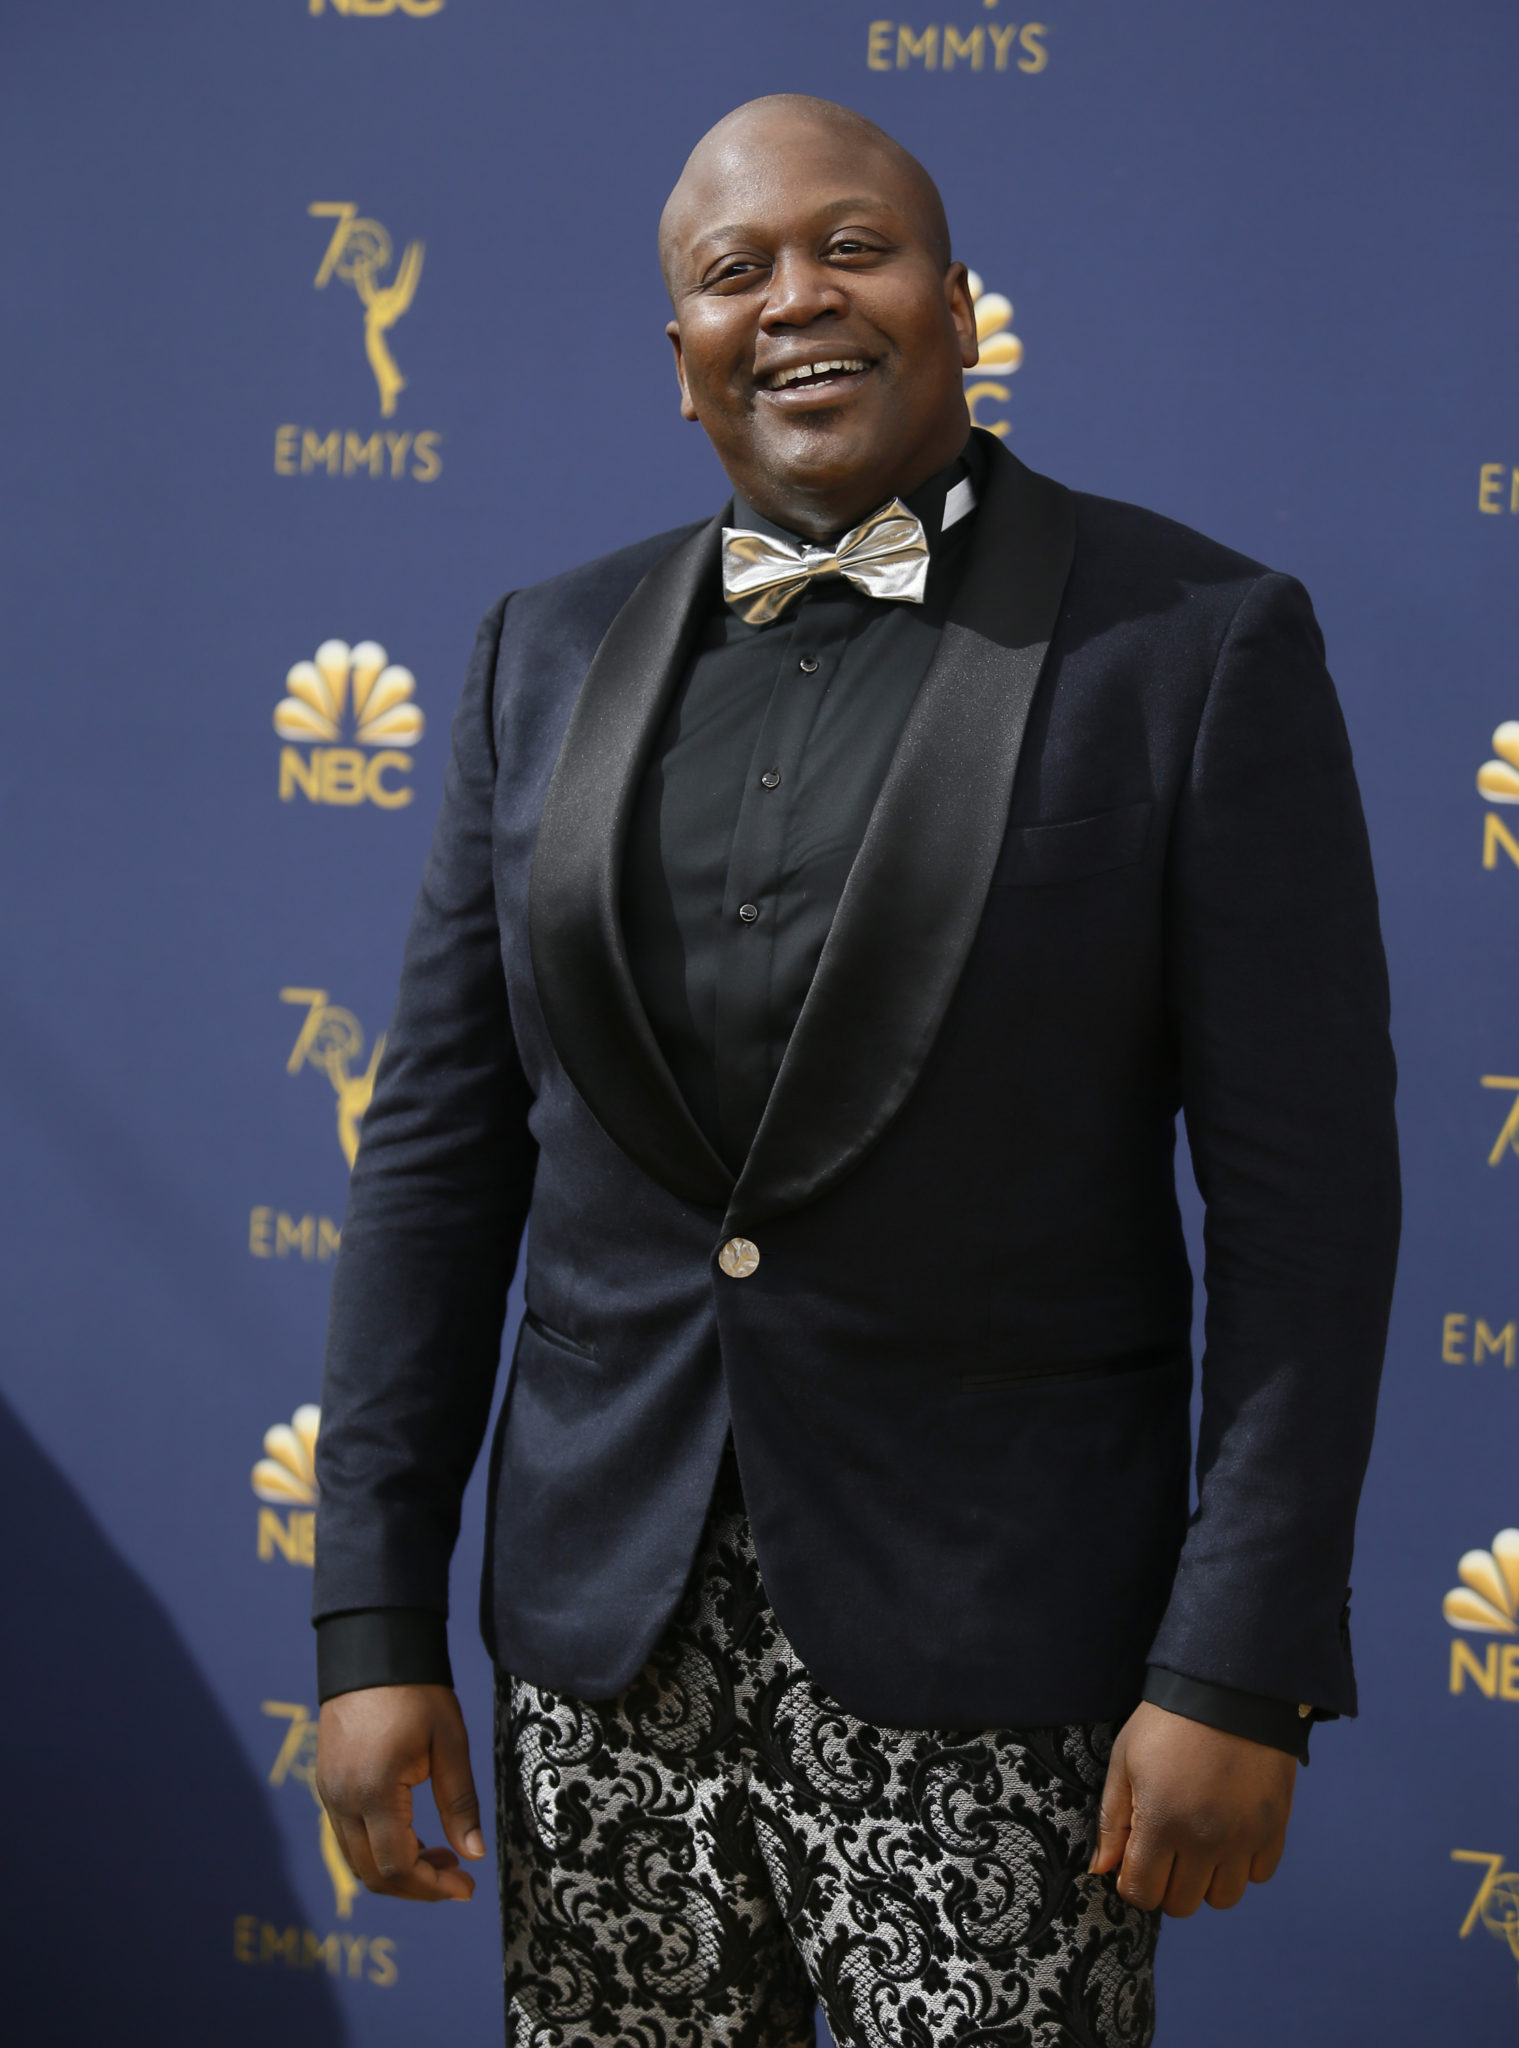 Tituss Burgess Emmys 4Chion Lifestyle